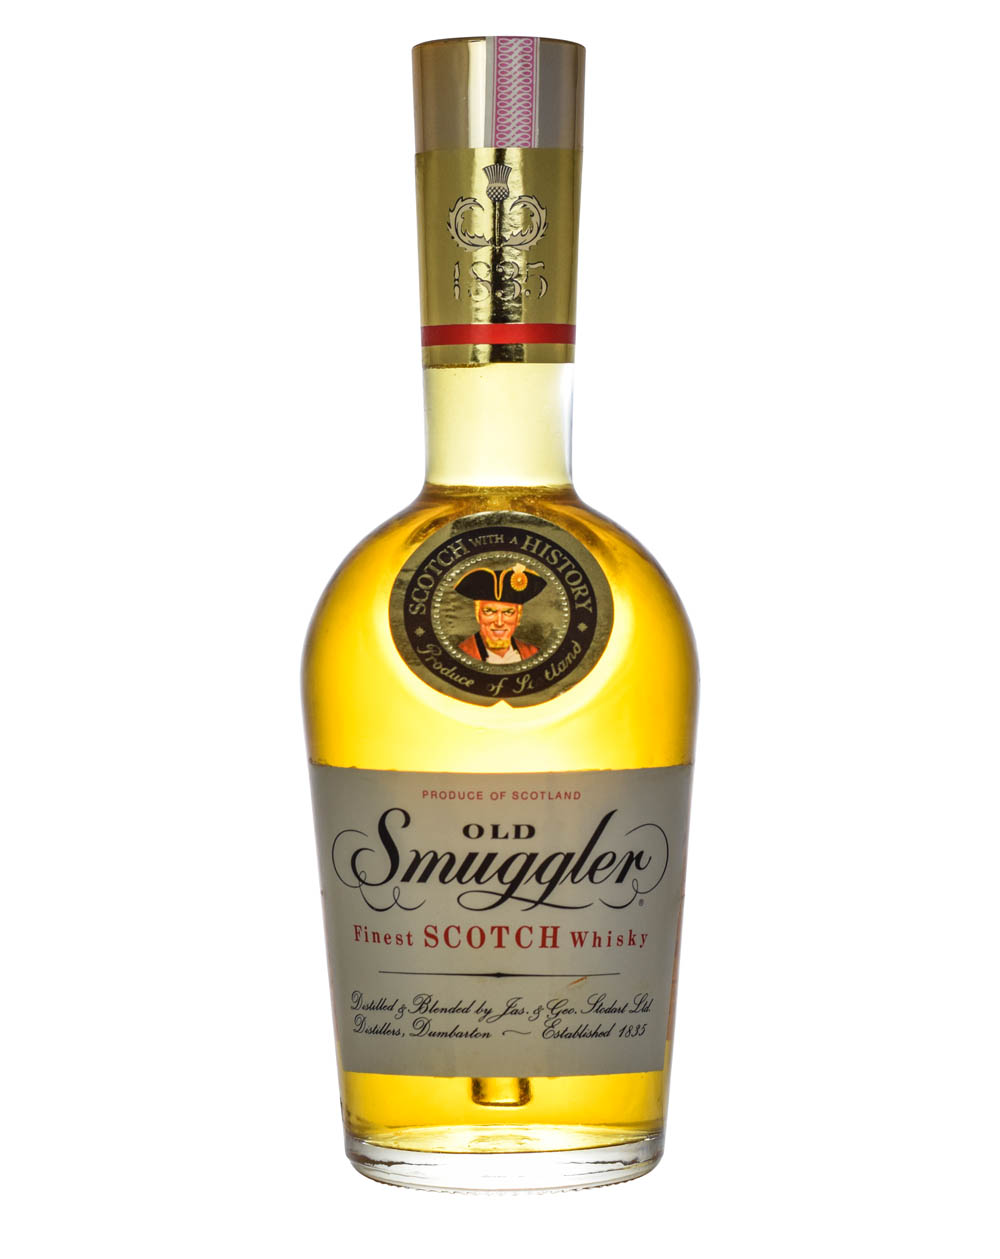 Old Smuggler 1970s Scotch Whisky Musthave Malts MHM